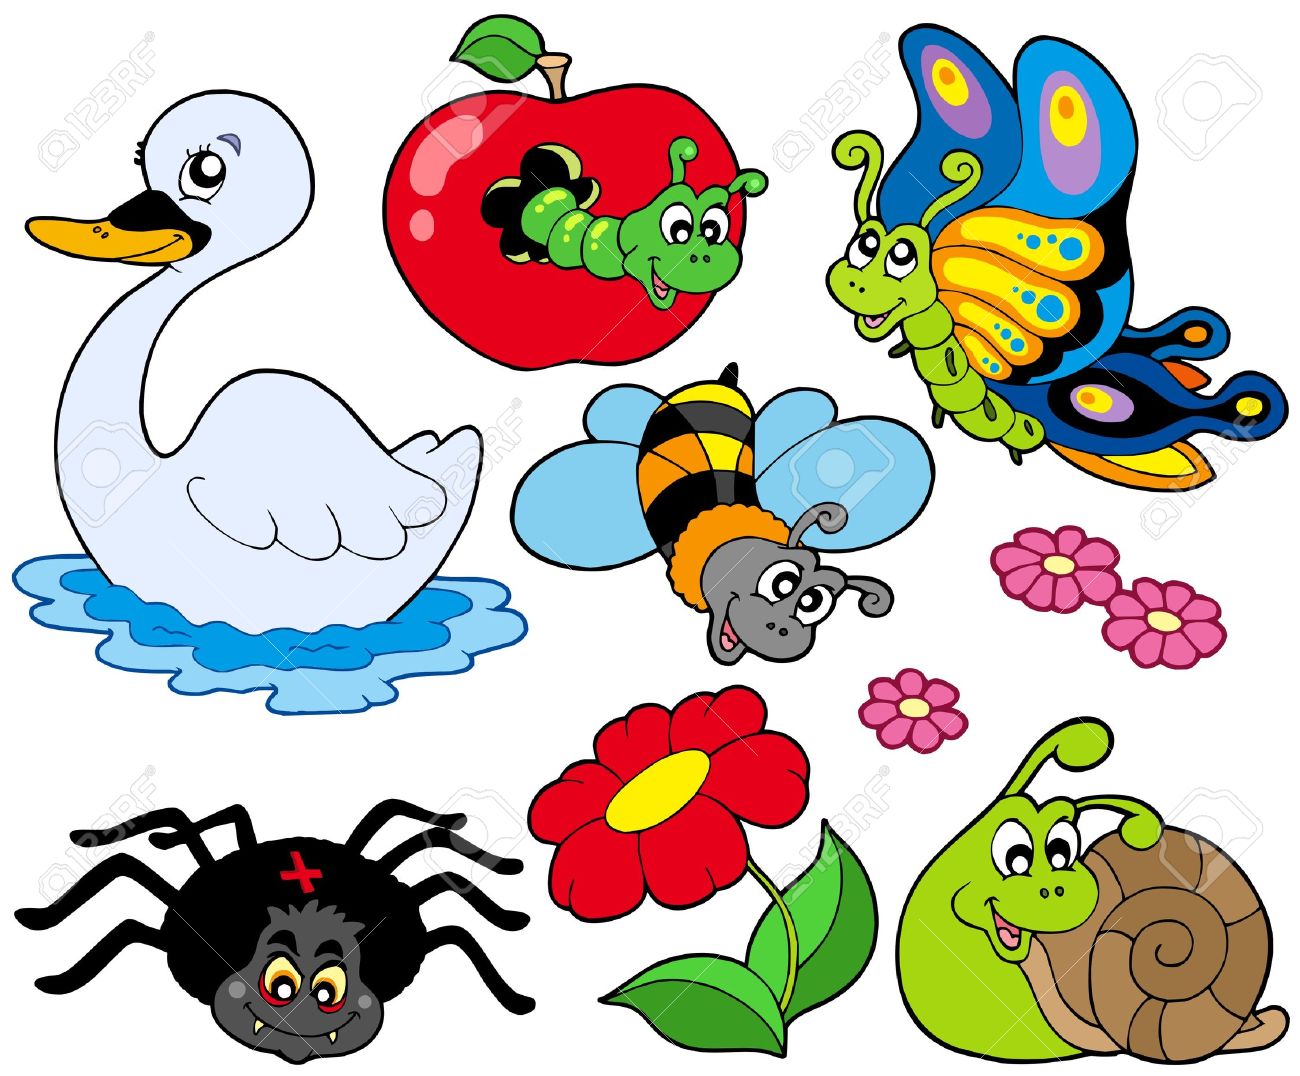 clipart free download animals - photo #11